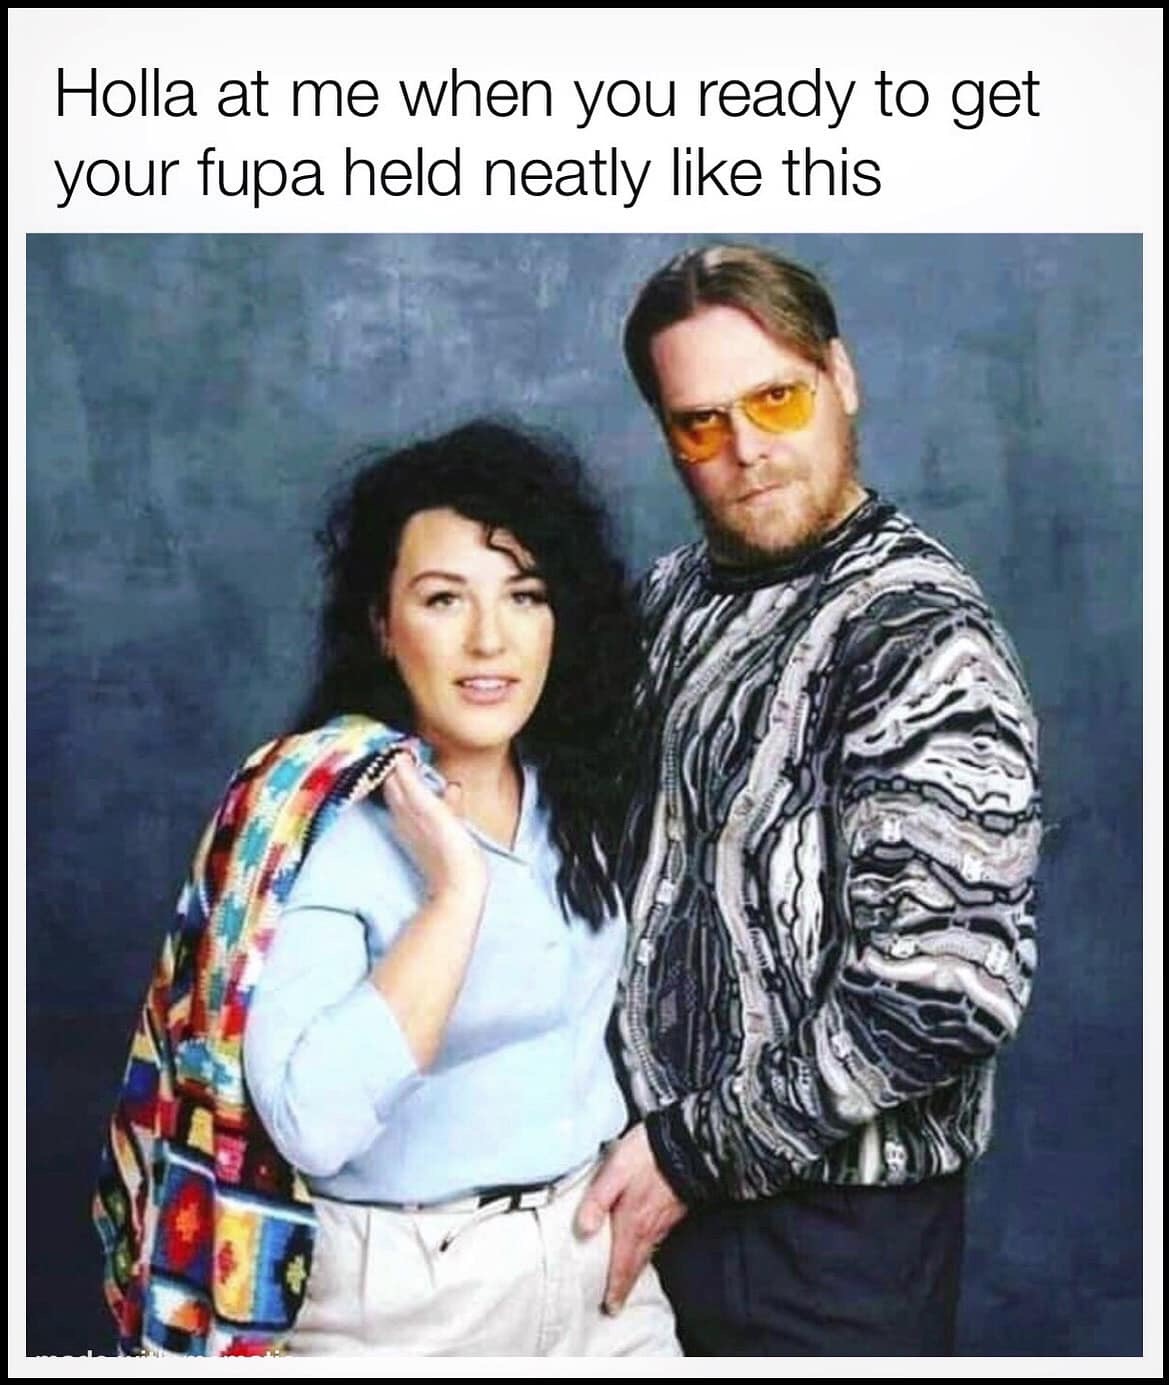 friendship - Holla at me when you ready to get your fupa held neatly this